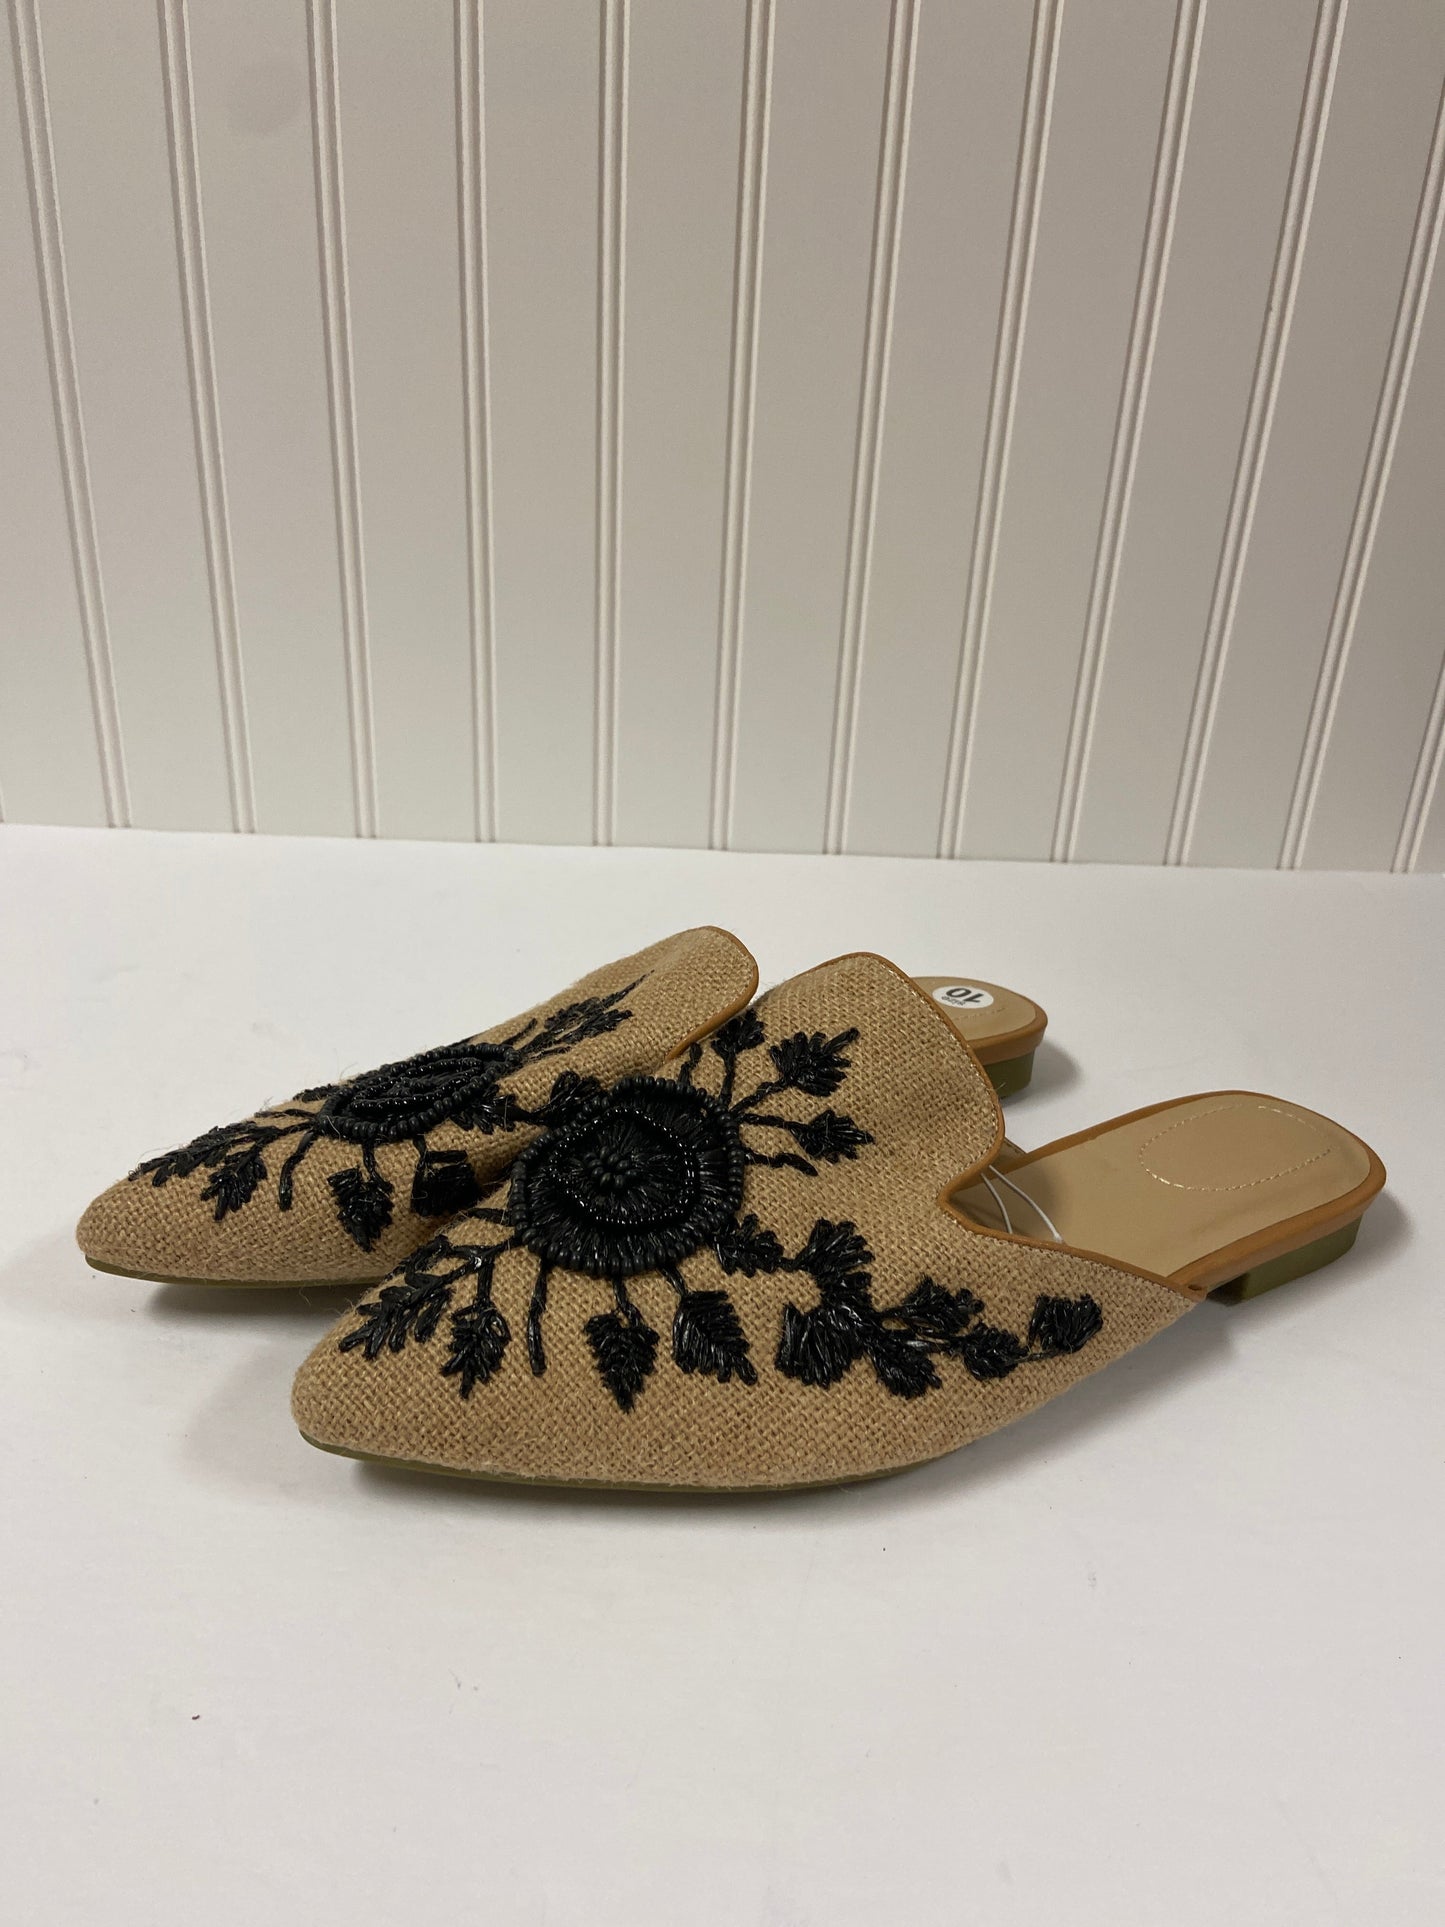 Shoes Flats By Clothes Mentor  Size: 10